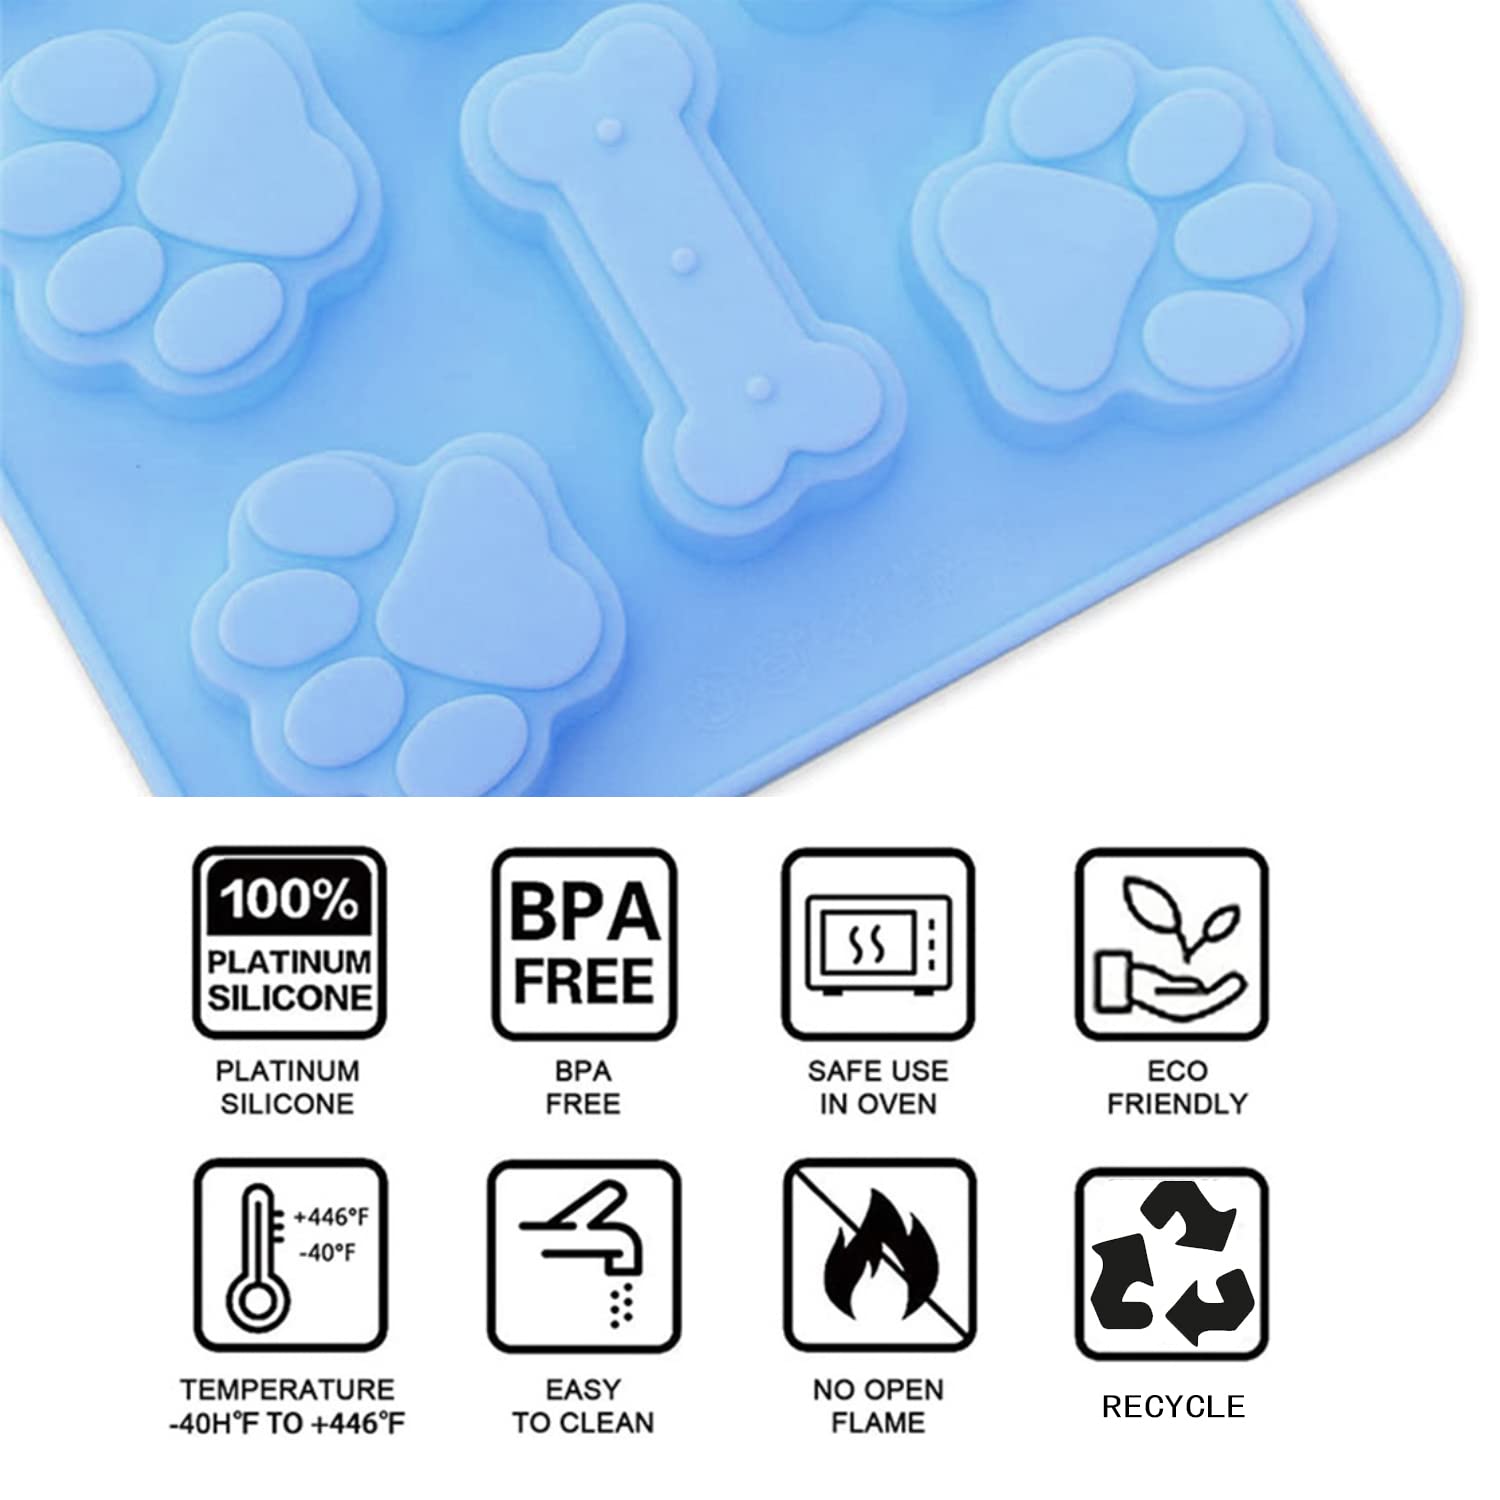 2 Pcs Silicone Puppy treat molds, Dog Paw and Bone Mold Ice Cube Mold, Jelly, Biscuits, Chocolate, Candy Baking Mold, Oven Microwave Freezer Dishwasher Safe-Pink & Blue (2)